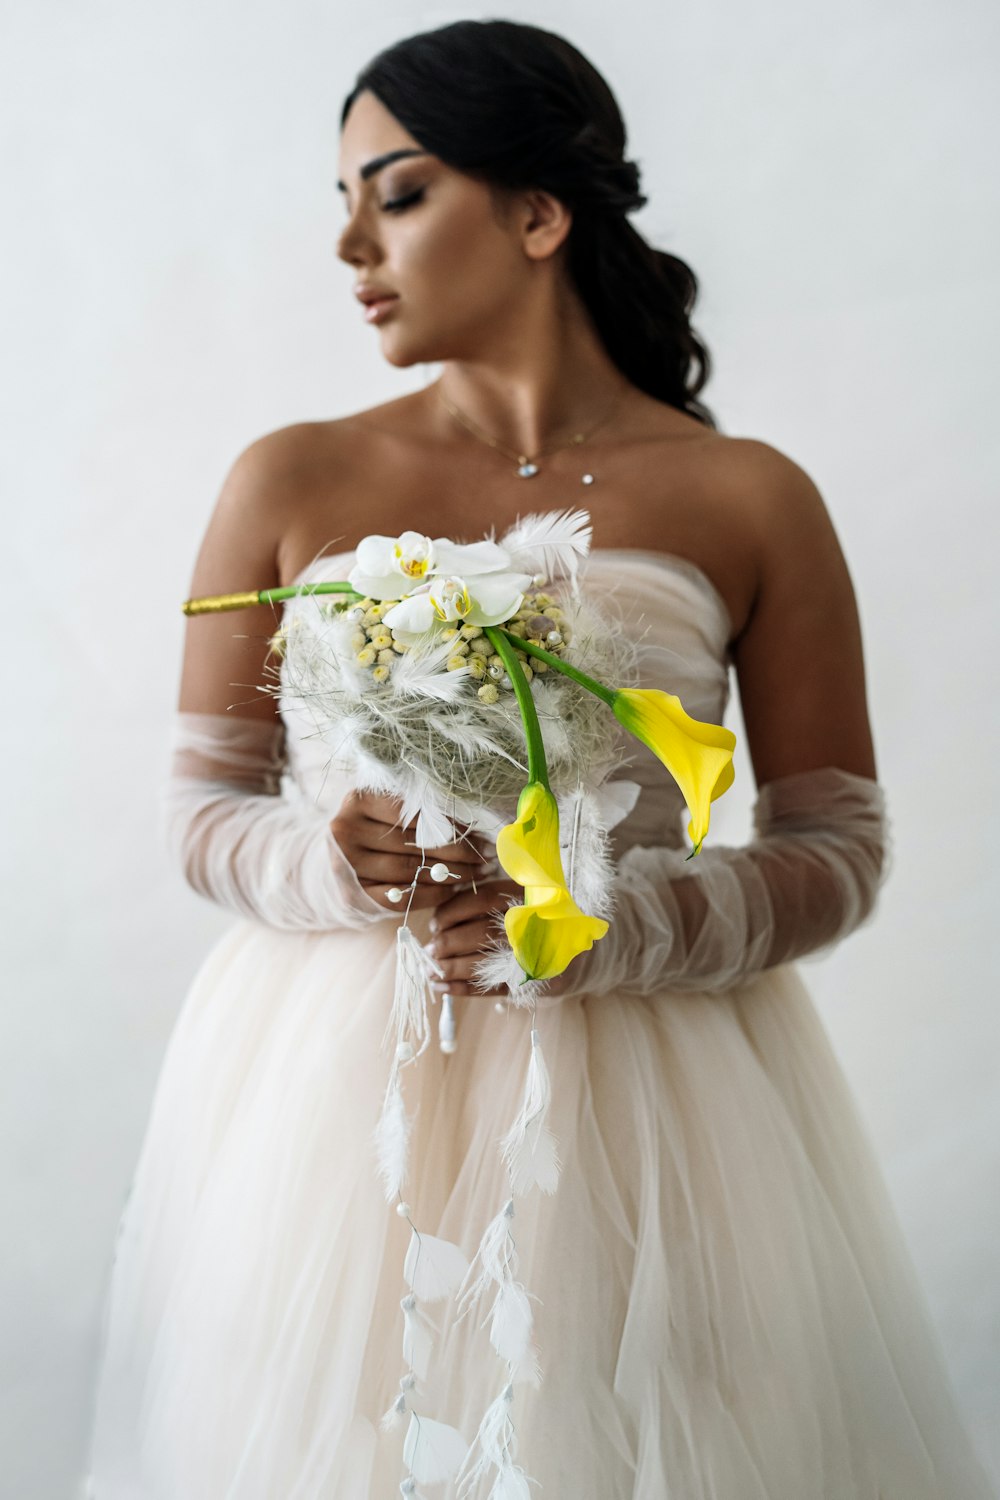 a woman in a wedding dress holding a bouquet of flowers